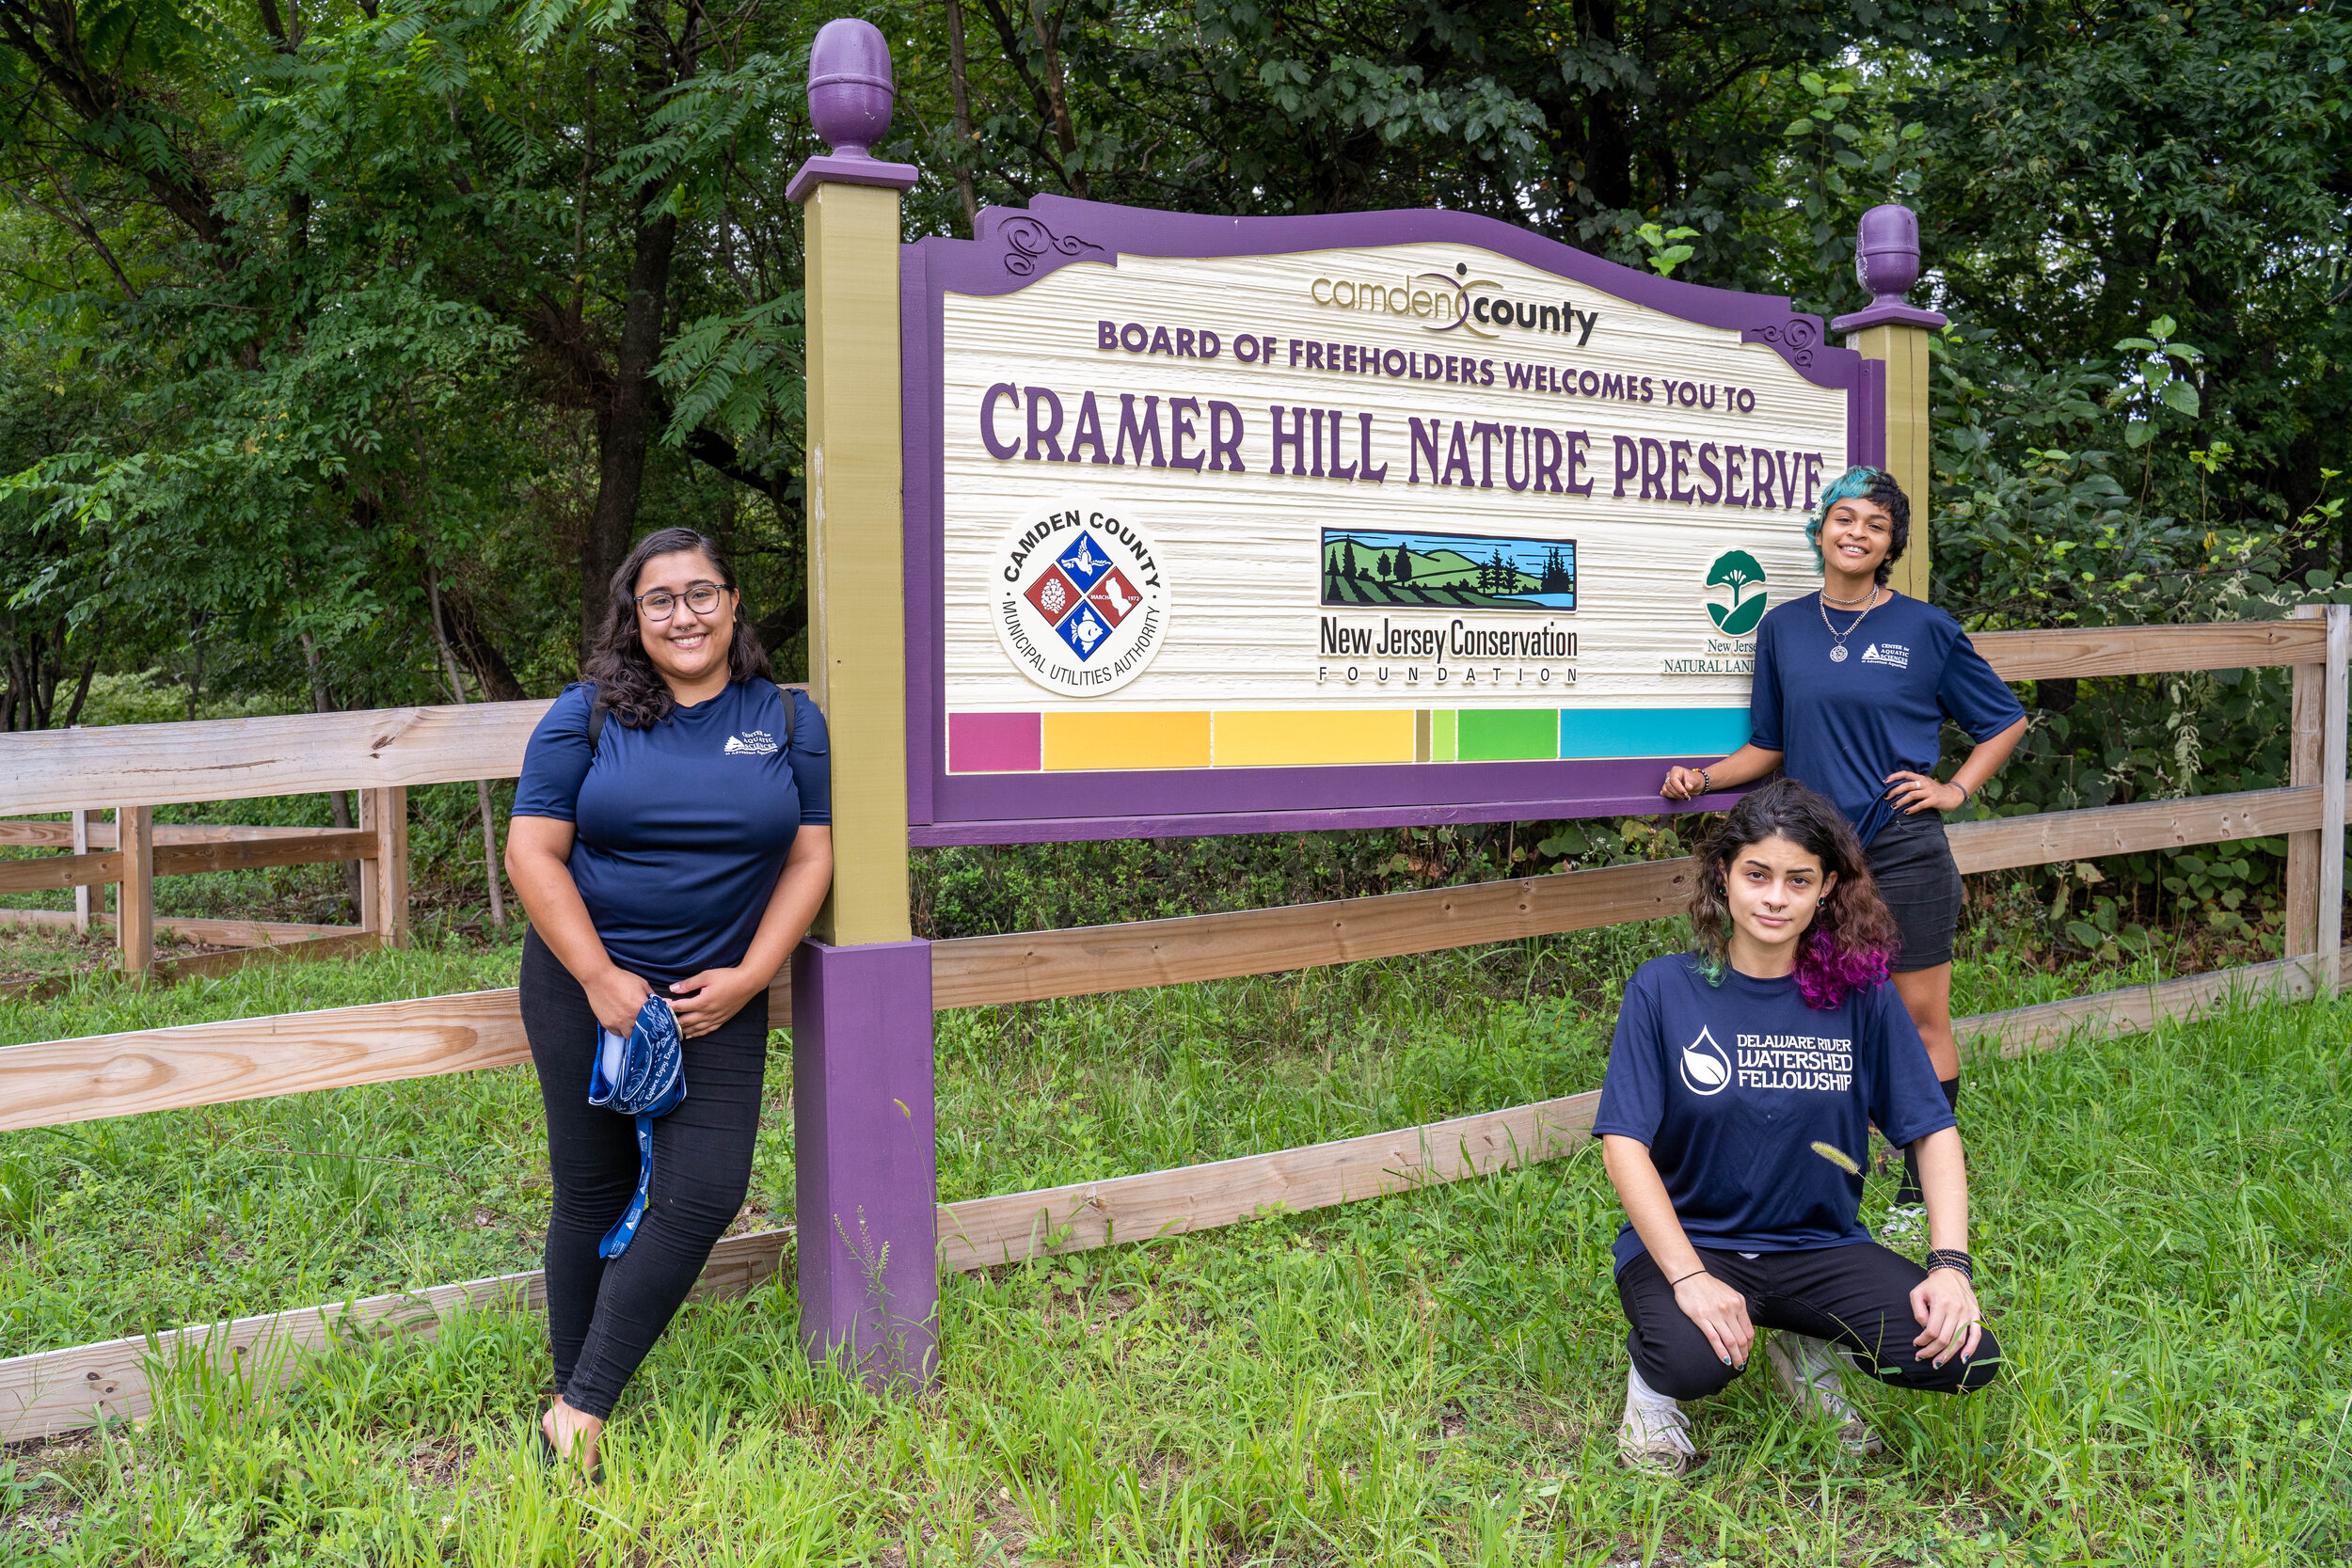 Three people posing in front of Cramer Hill Nature Preserve sign